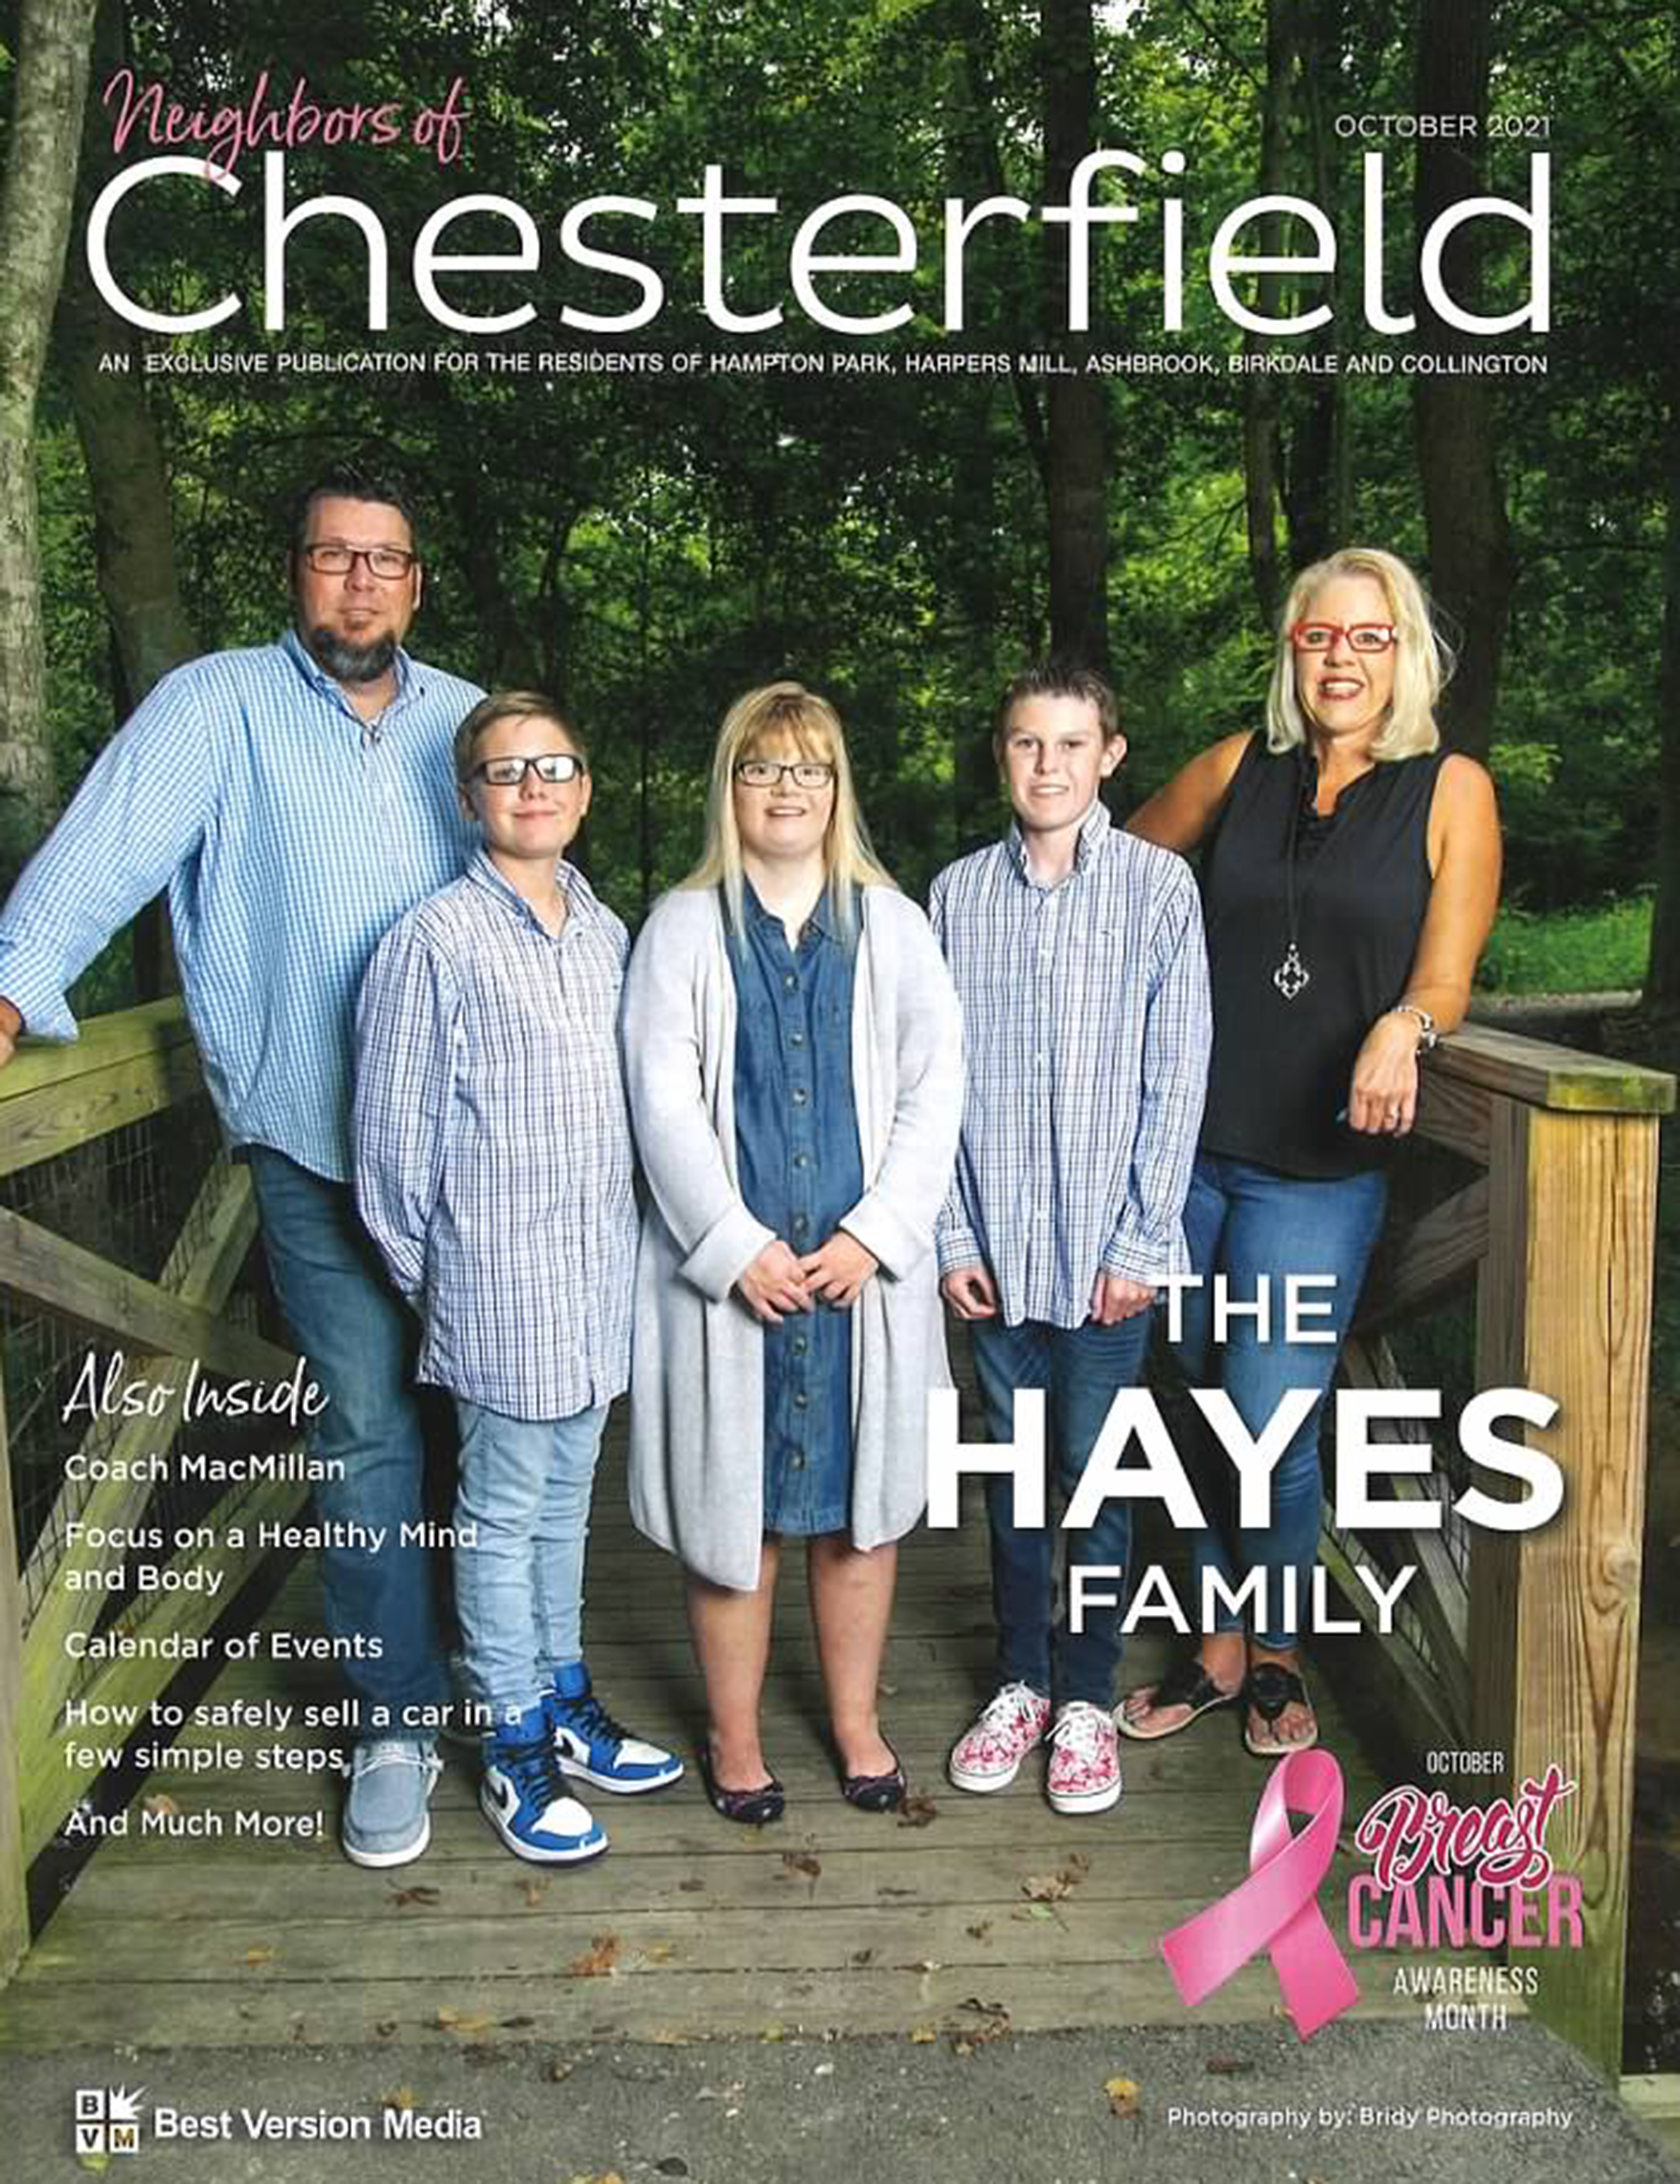 Shannon with her three kids and her husband on the cover of a magazine called Neighbors of Chesterfield.